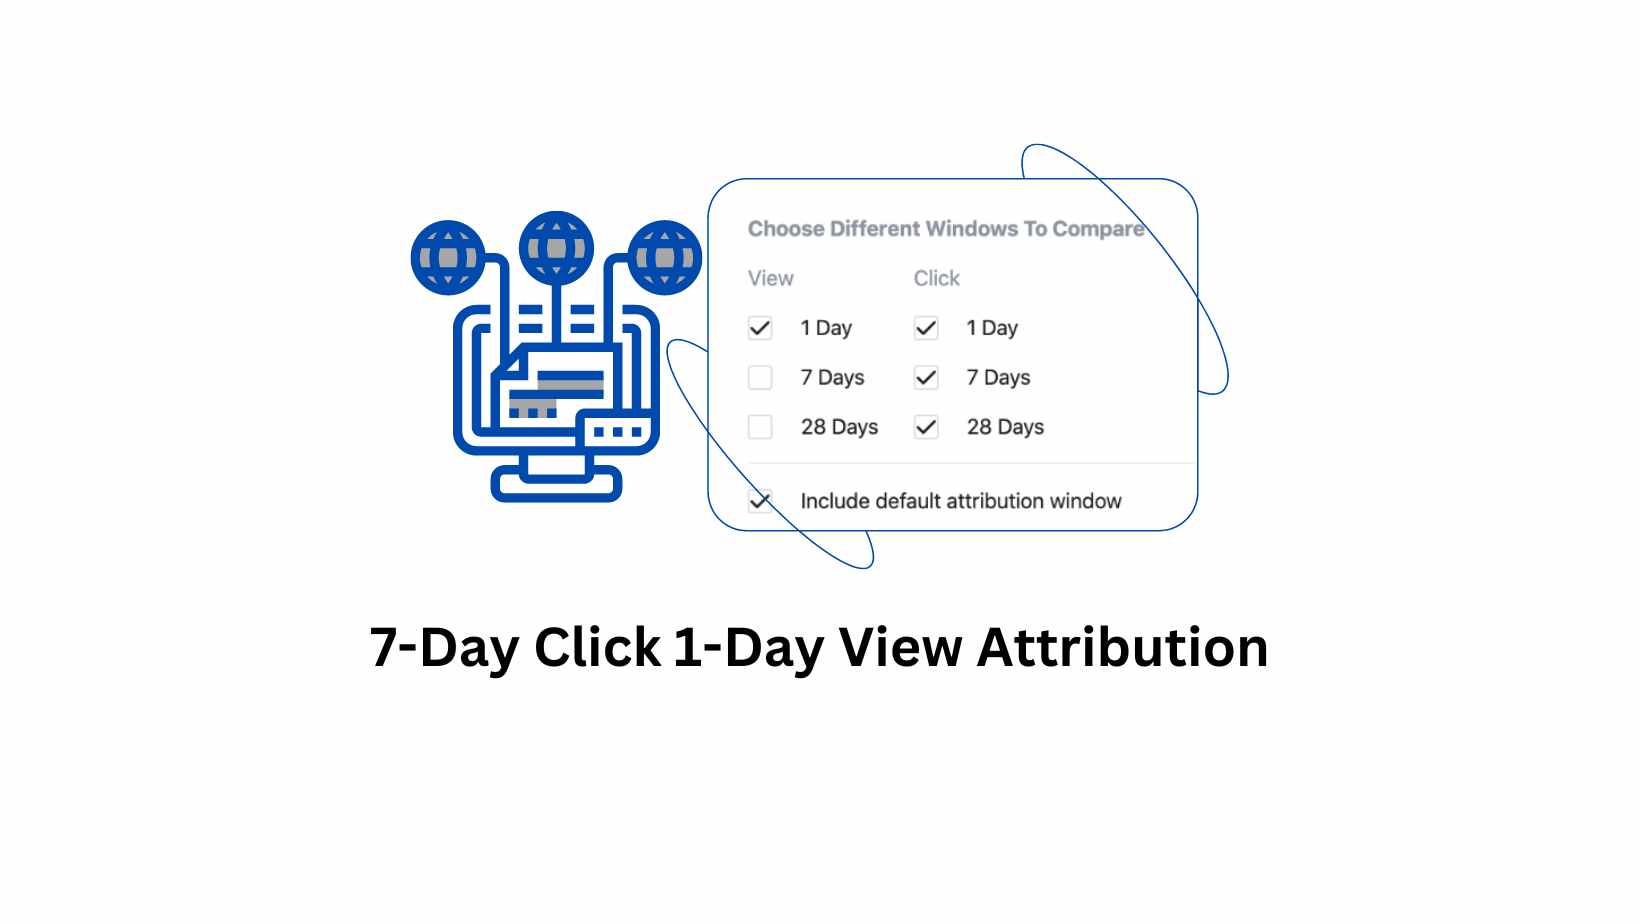 7-Day Click 1-Day View Attribution